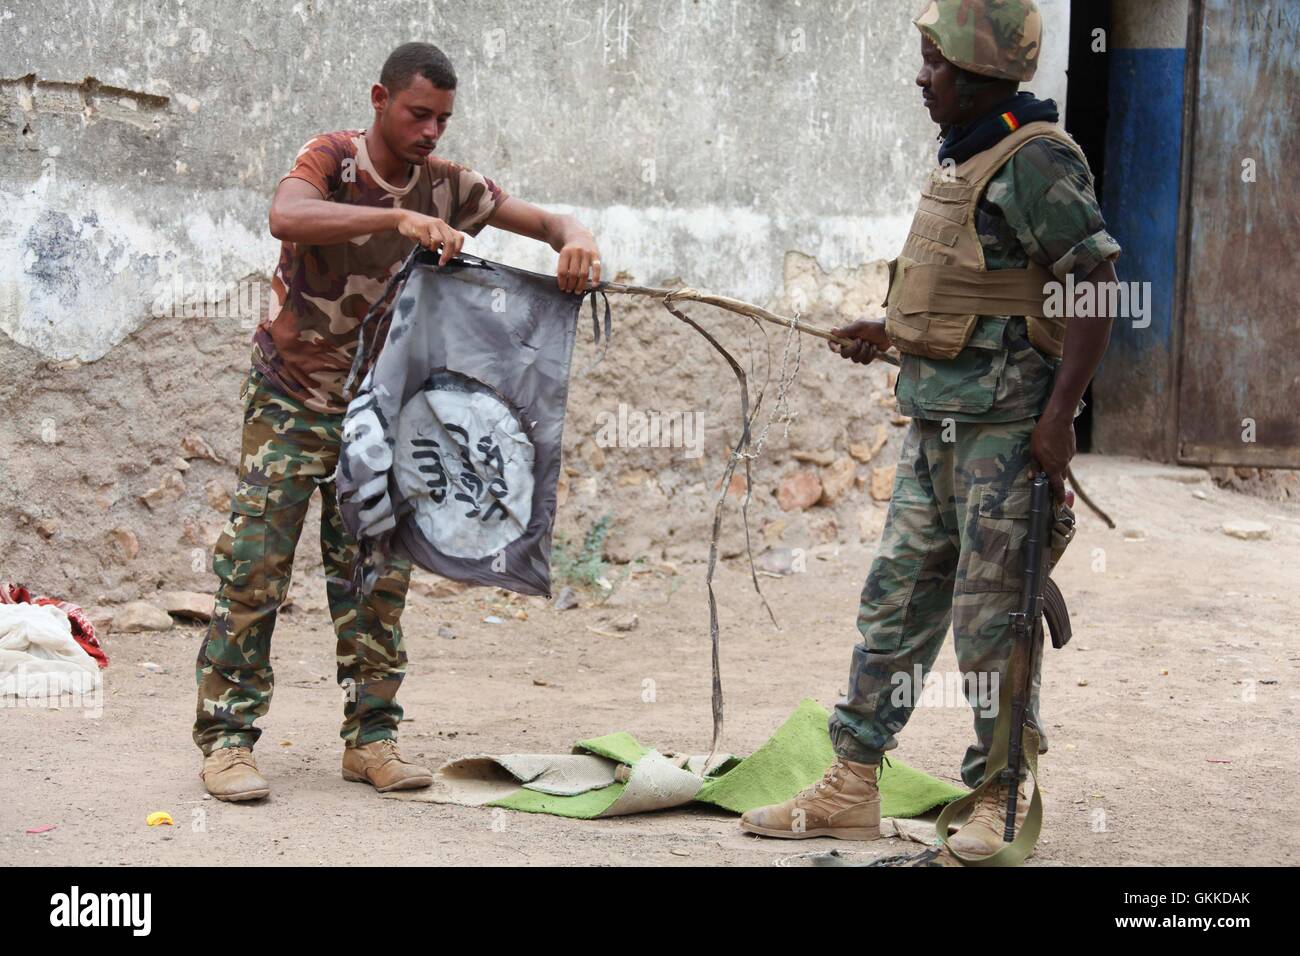 Djiboutian soldiers destroy an al Shabaab flag after the town of Bula Burde was liberated by AMISOM forces on 16th March 2014. AU UN IST PHOTO / Ilyas A. Abukar Stock Photo